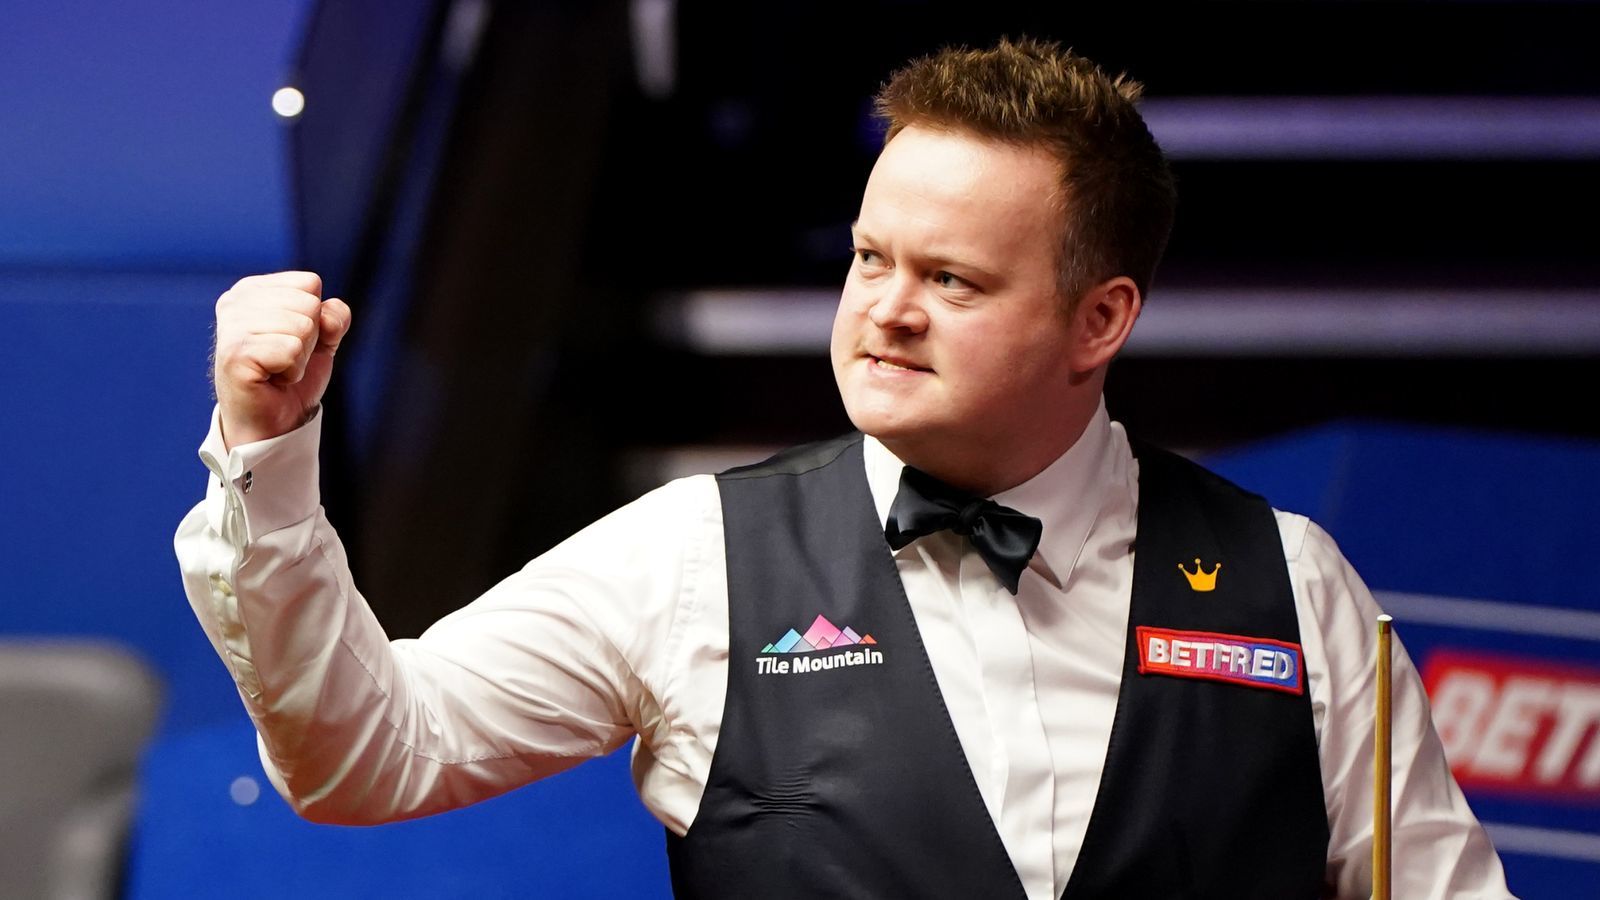 Shaun Murphy vs. Stephen Maguire Prediction, Betting Tips & Odds │16 APRIL, 2022